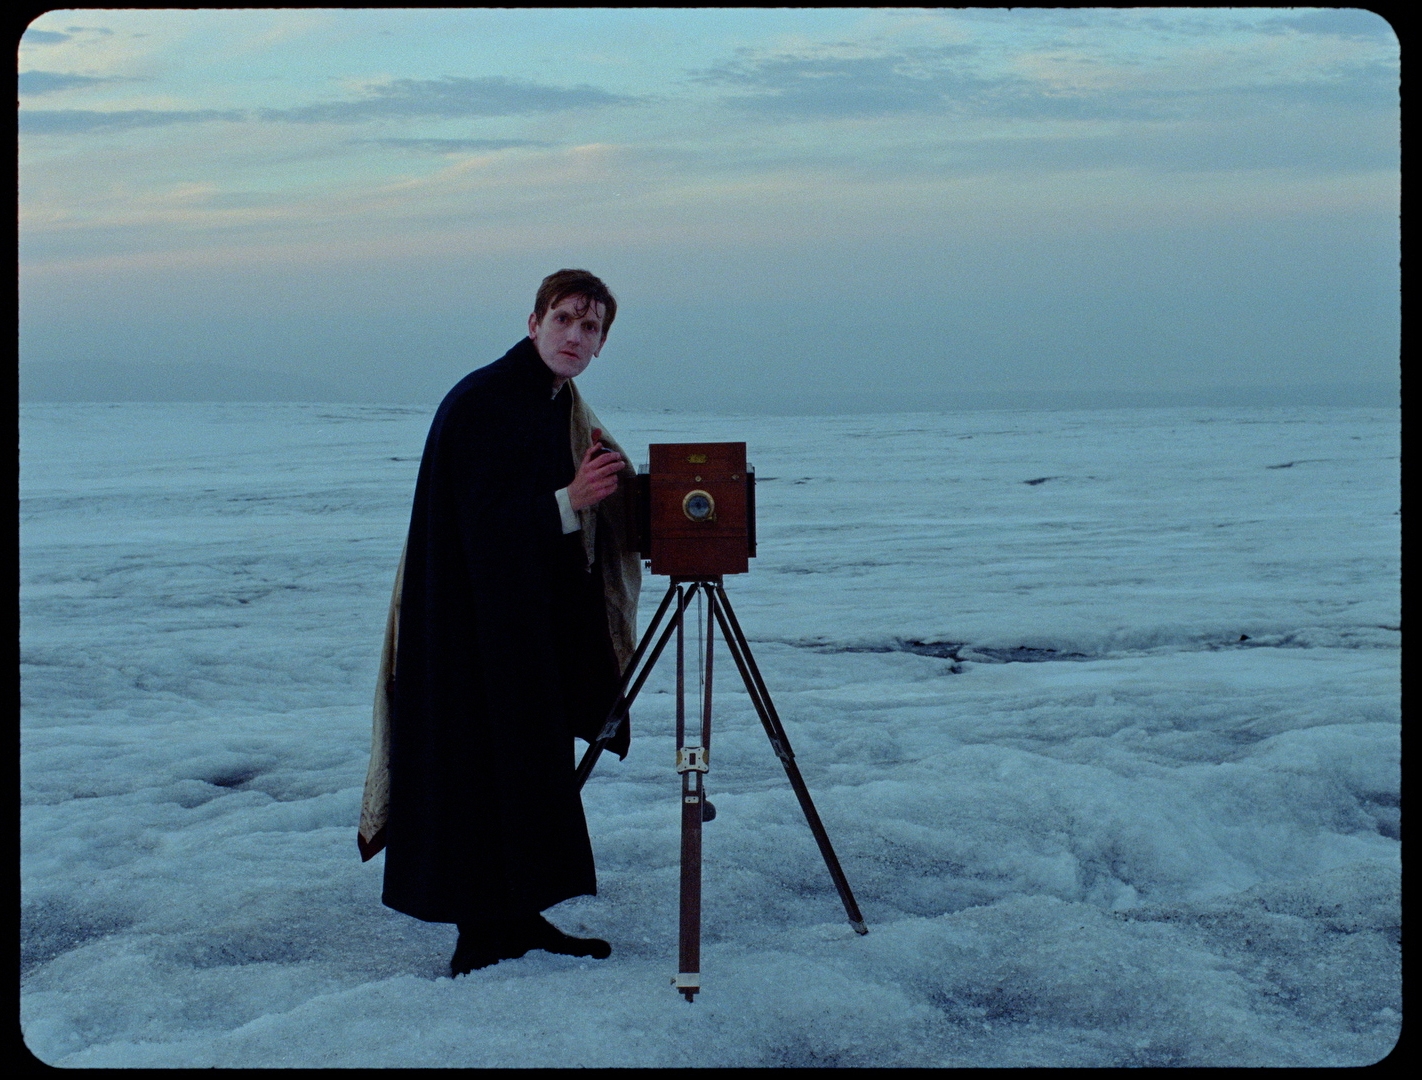 Production photo from the set of Godland the movie, showing the Danish priest posing with his camera, taking a photo